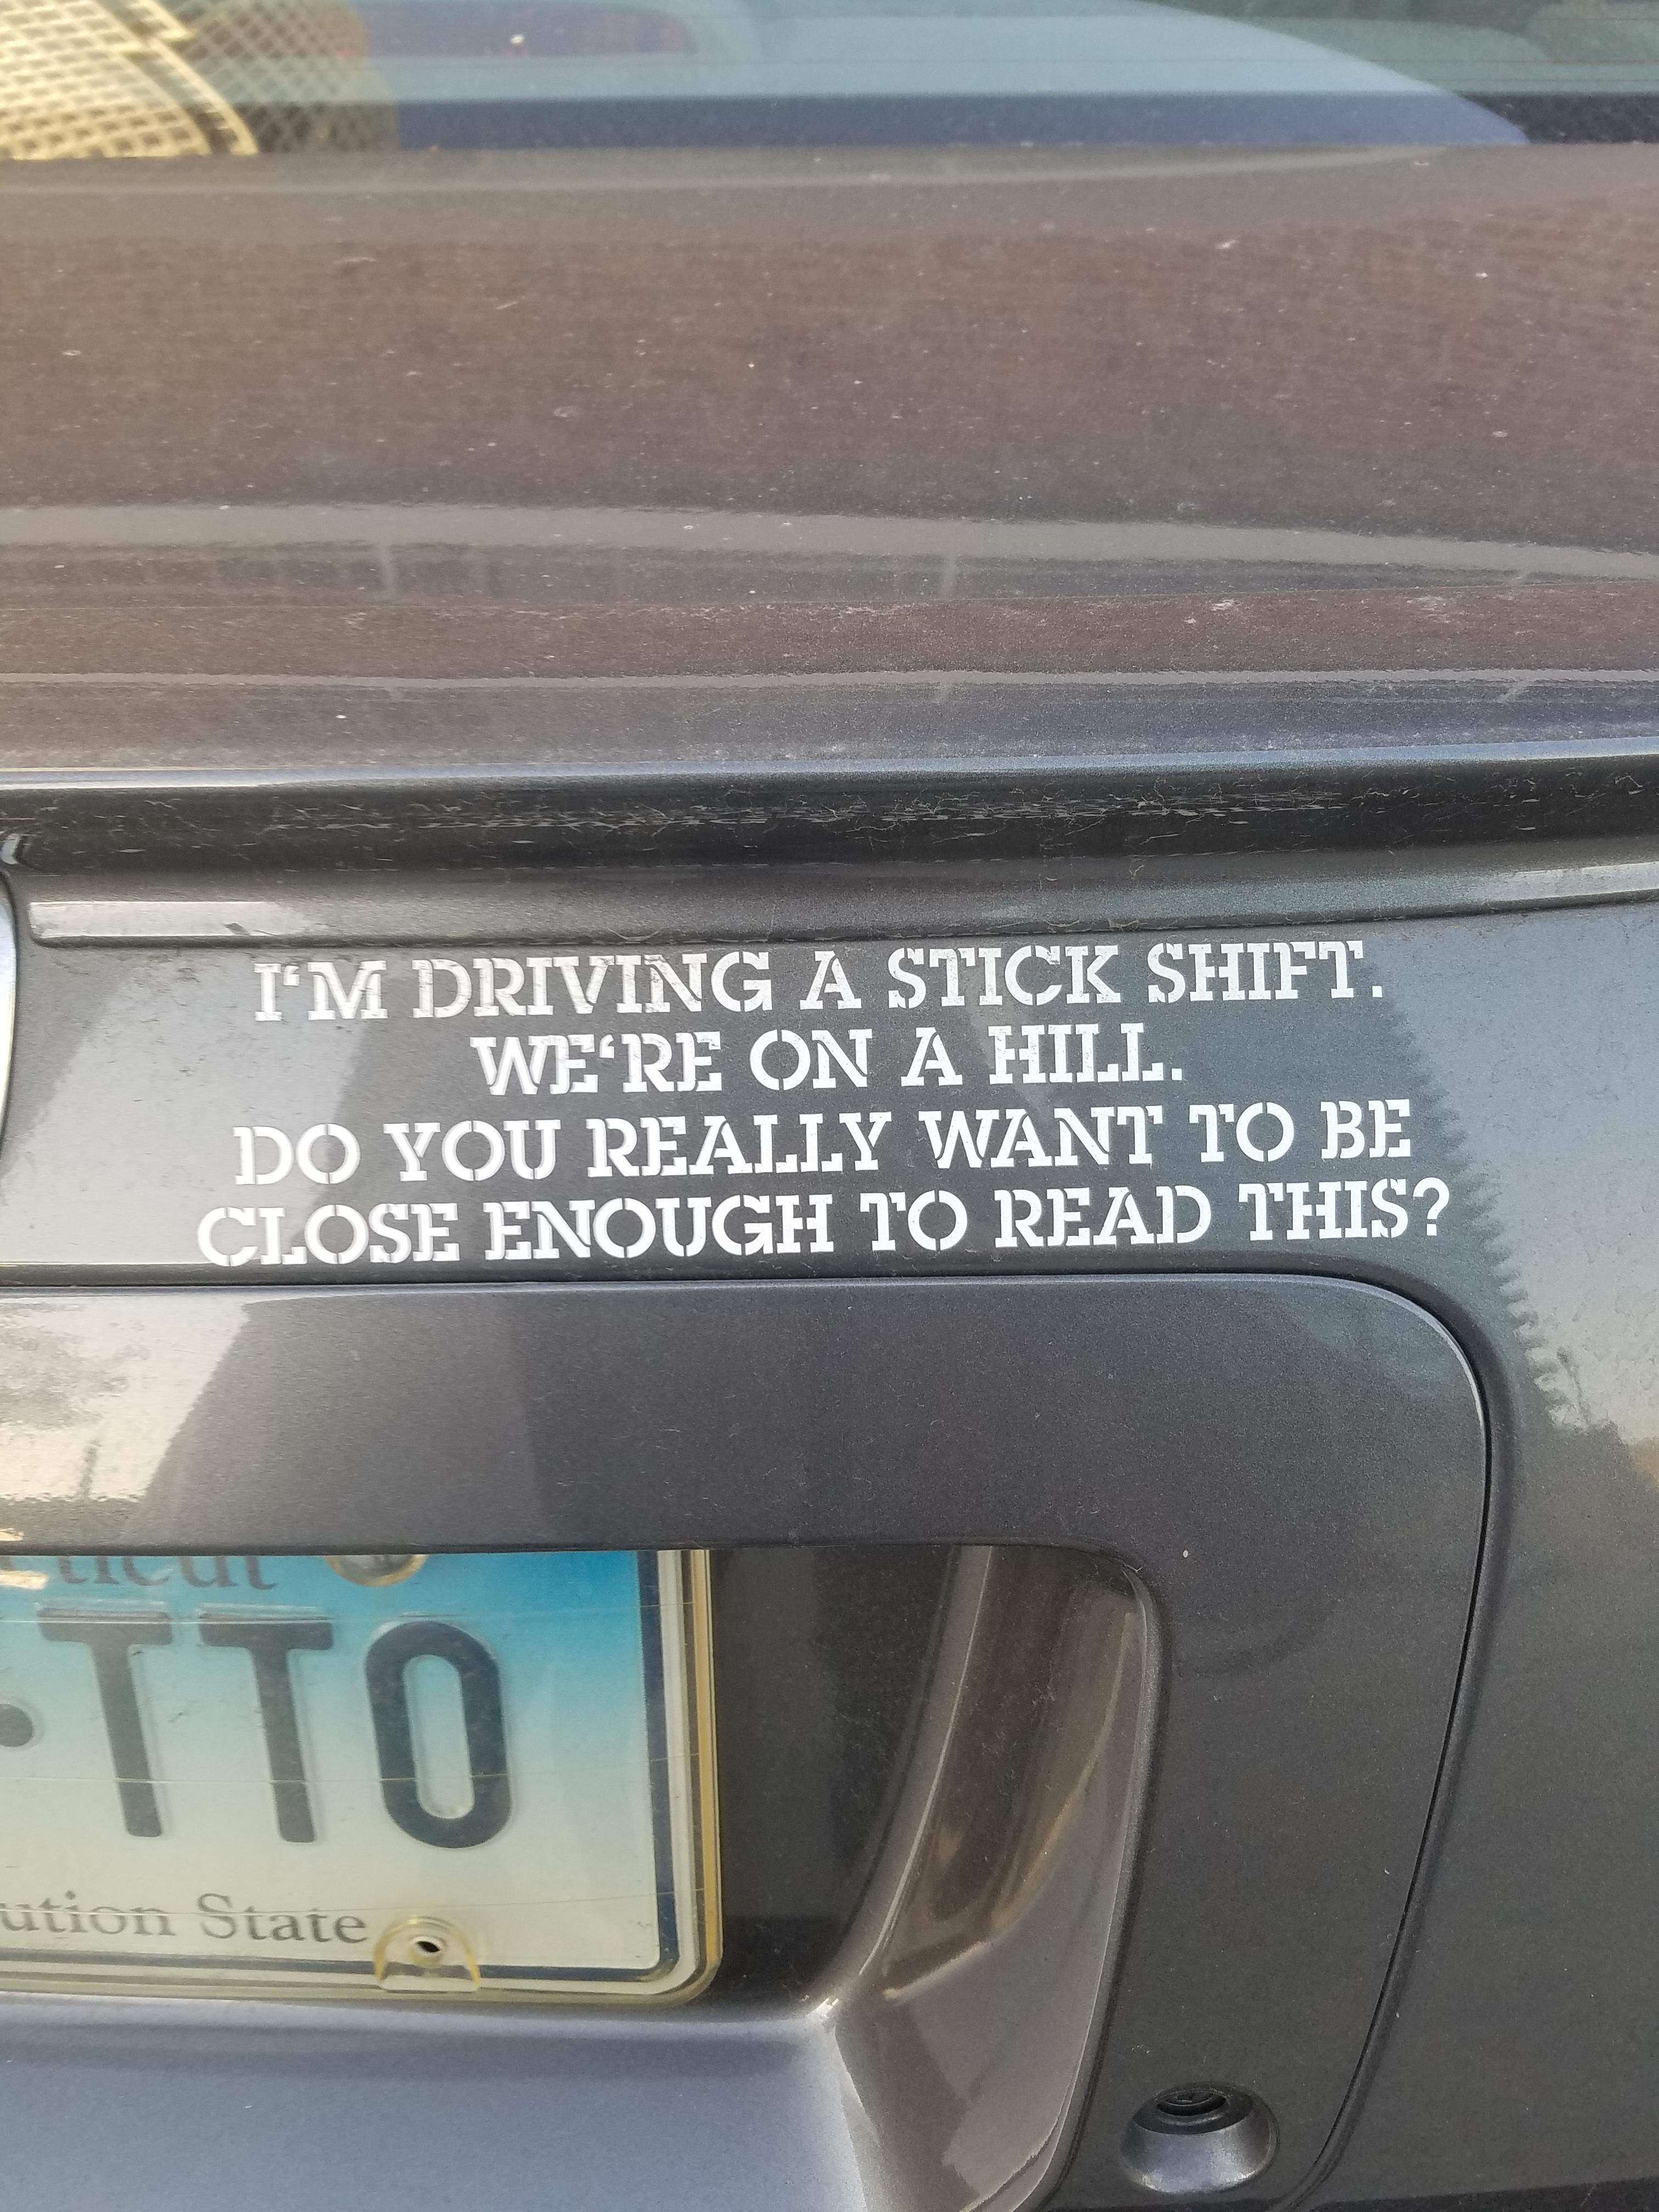 funny stick shift memes - Tm Driving A Stick Shift. We'Re On A Hill. Do You Really Want To Be Close Enough To Read This? Etto ution State